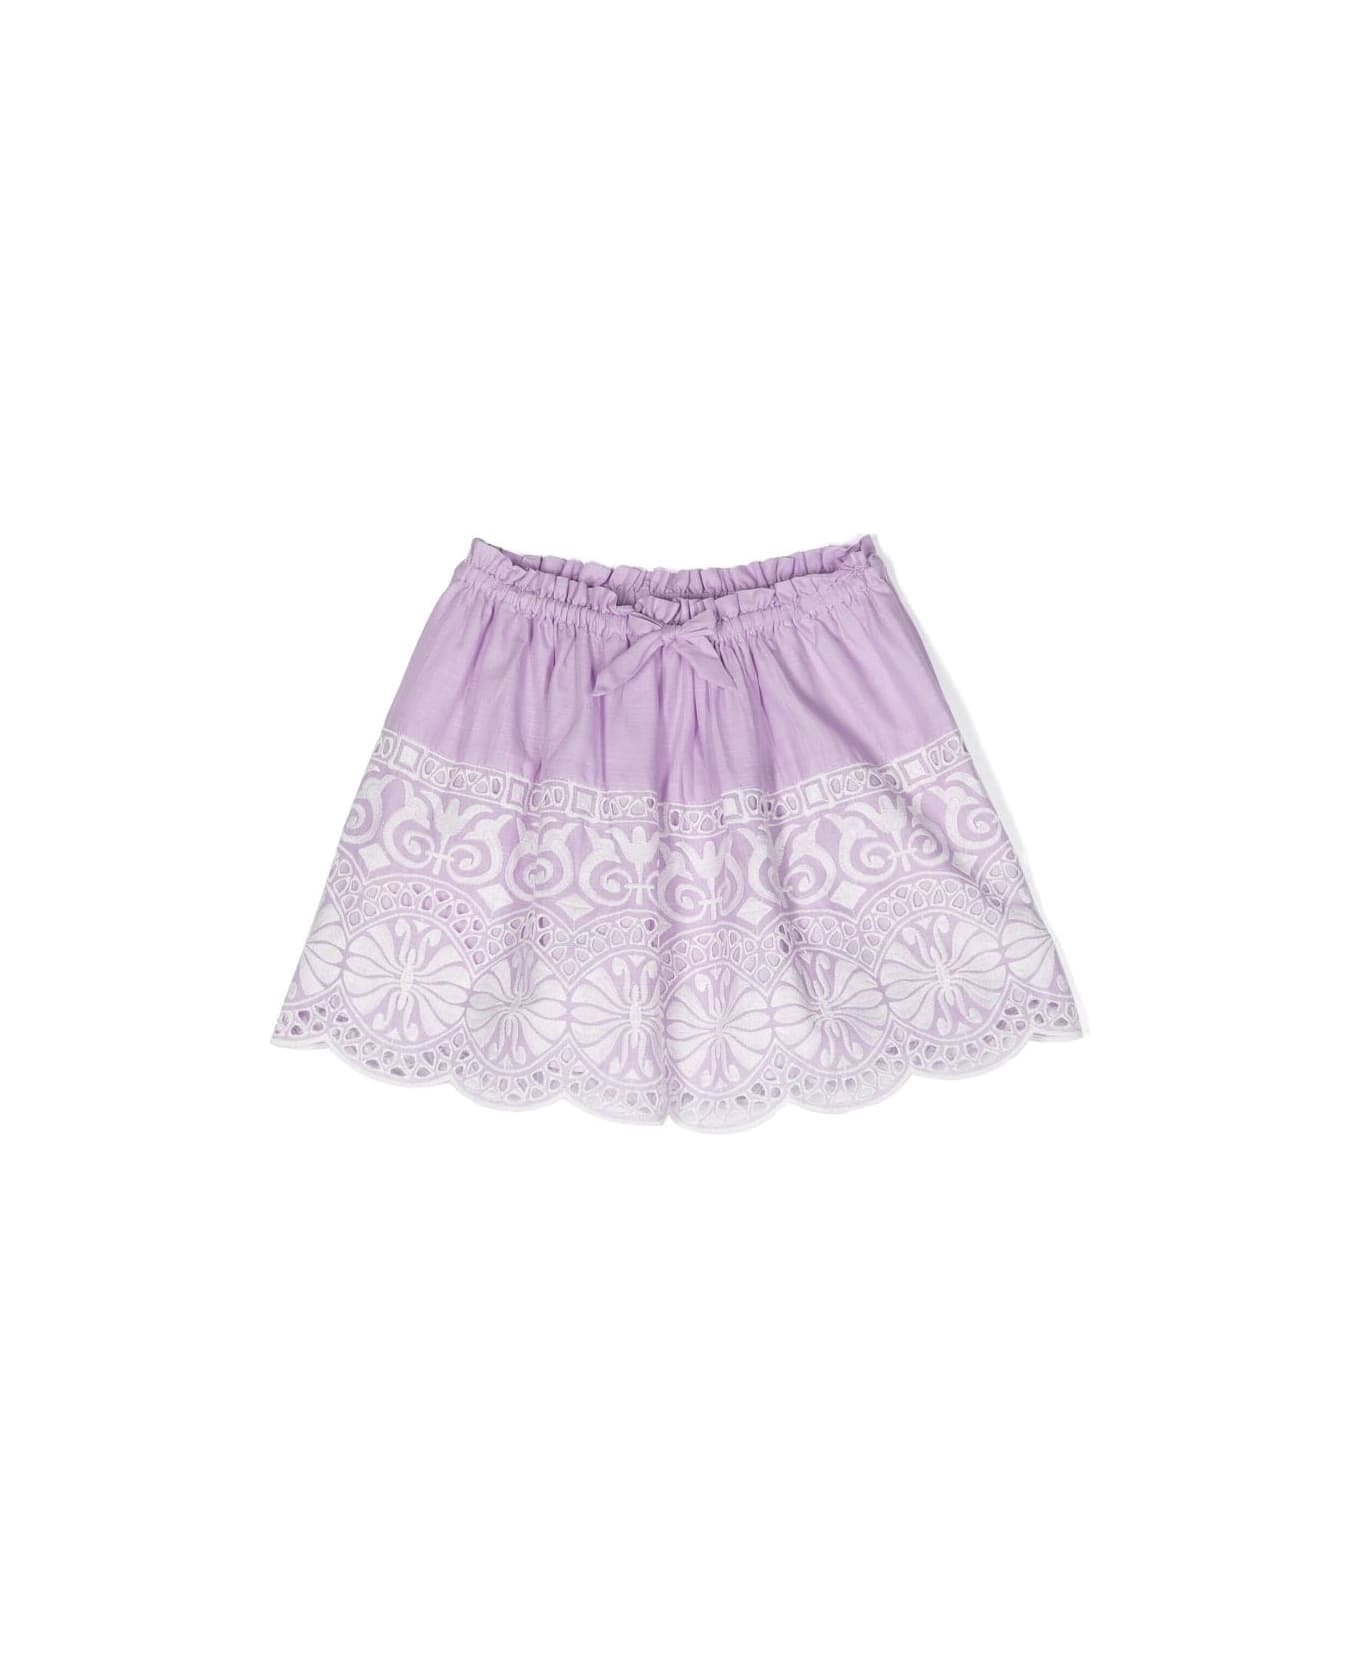 Zimmermann Skirt With Embroidery - Lilla ボトムス